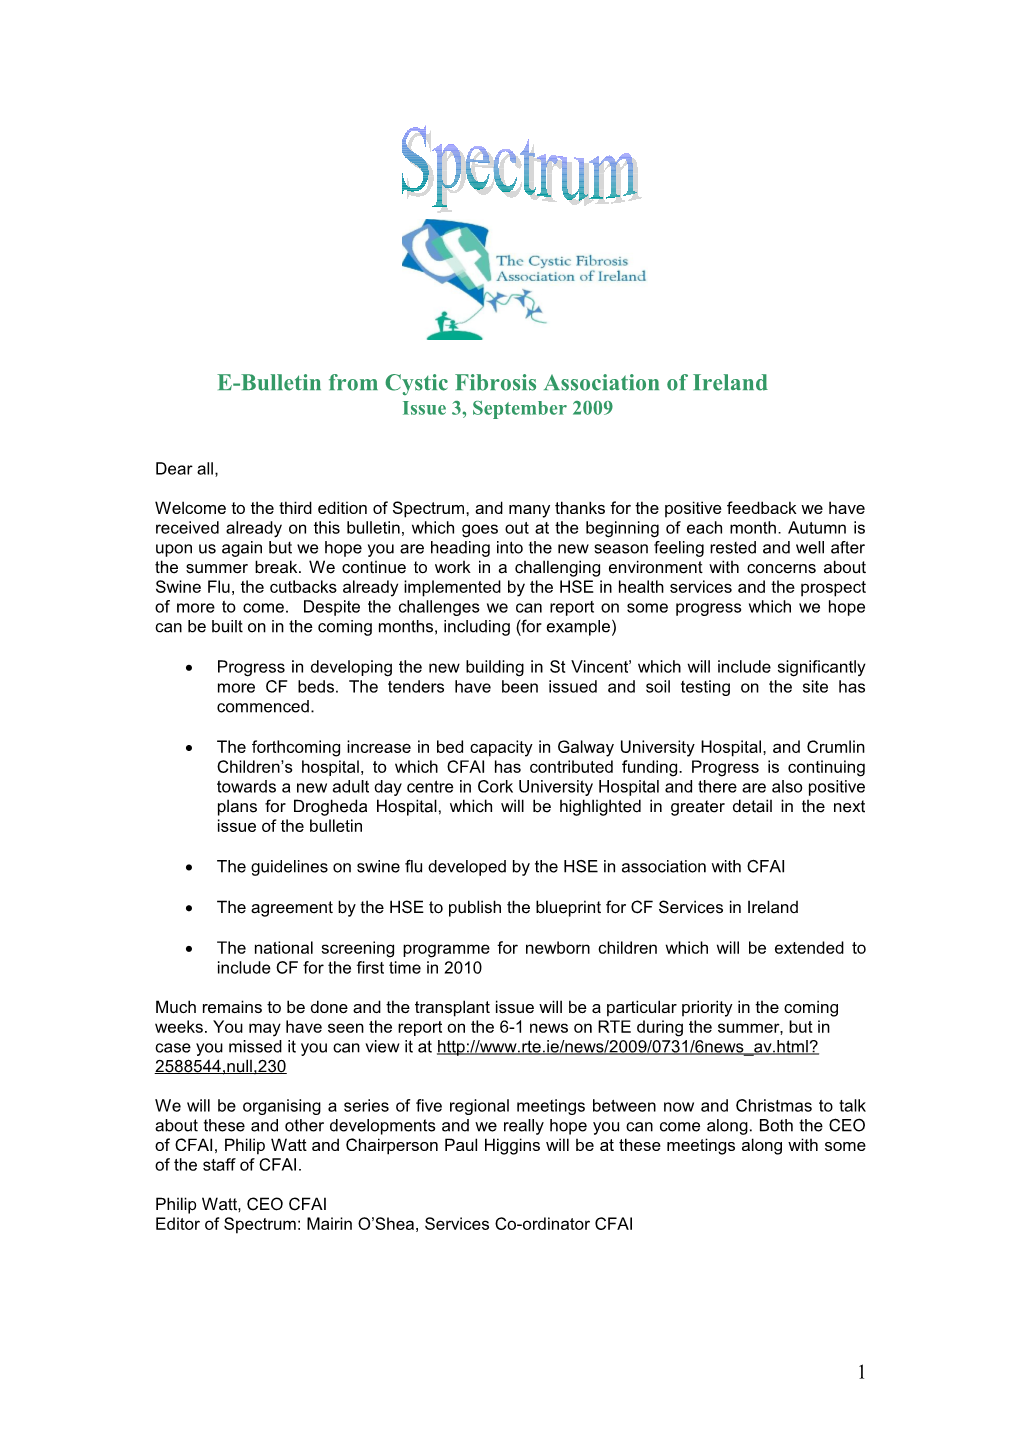 E-Bulletin from Cystic Fibrosis Association of Ireland